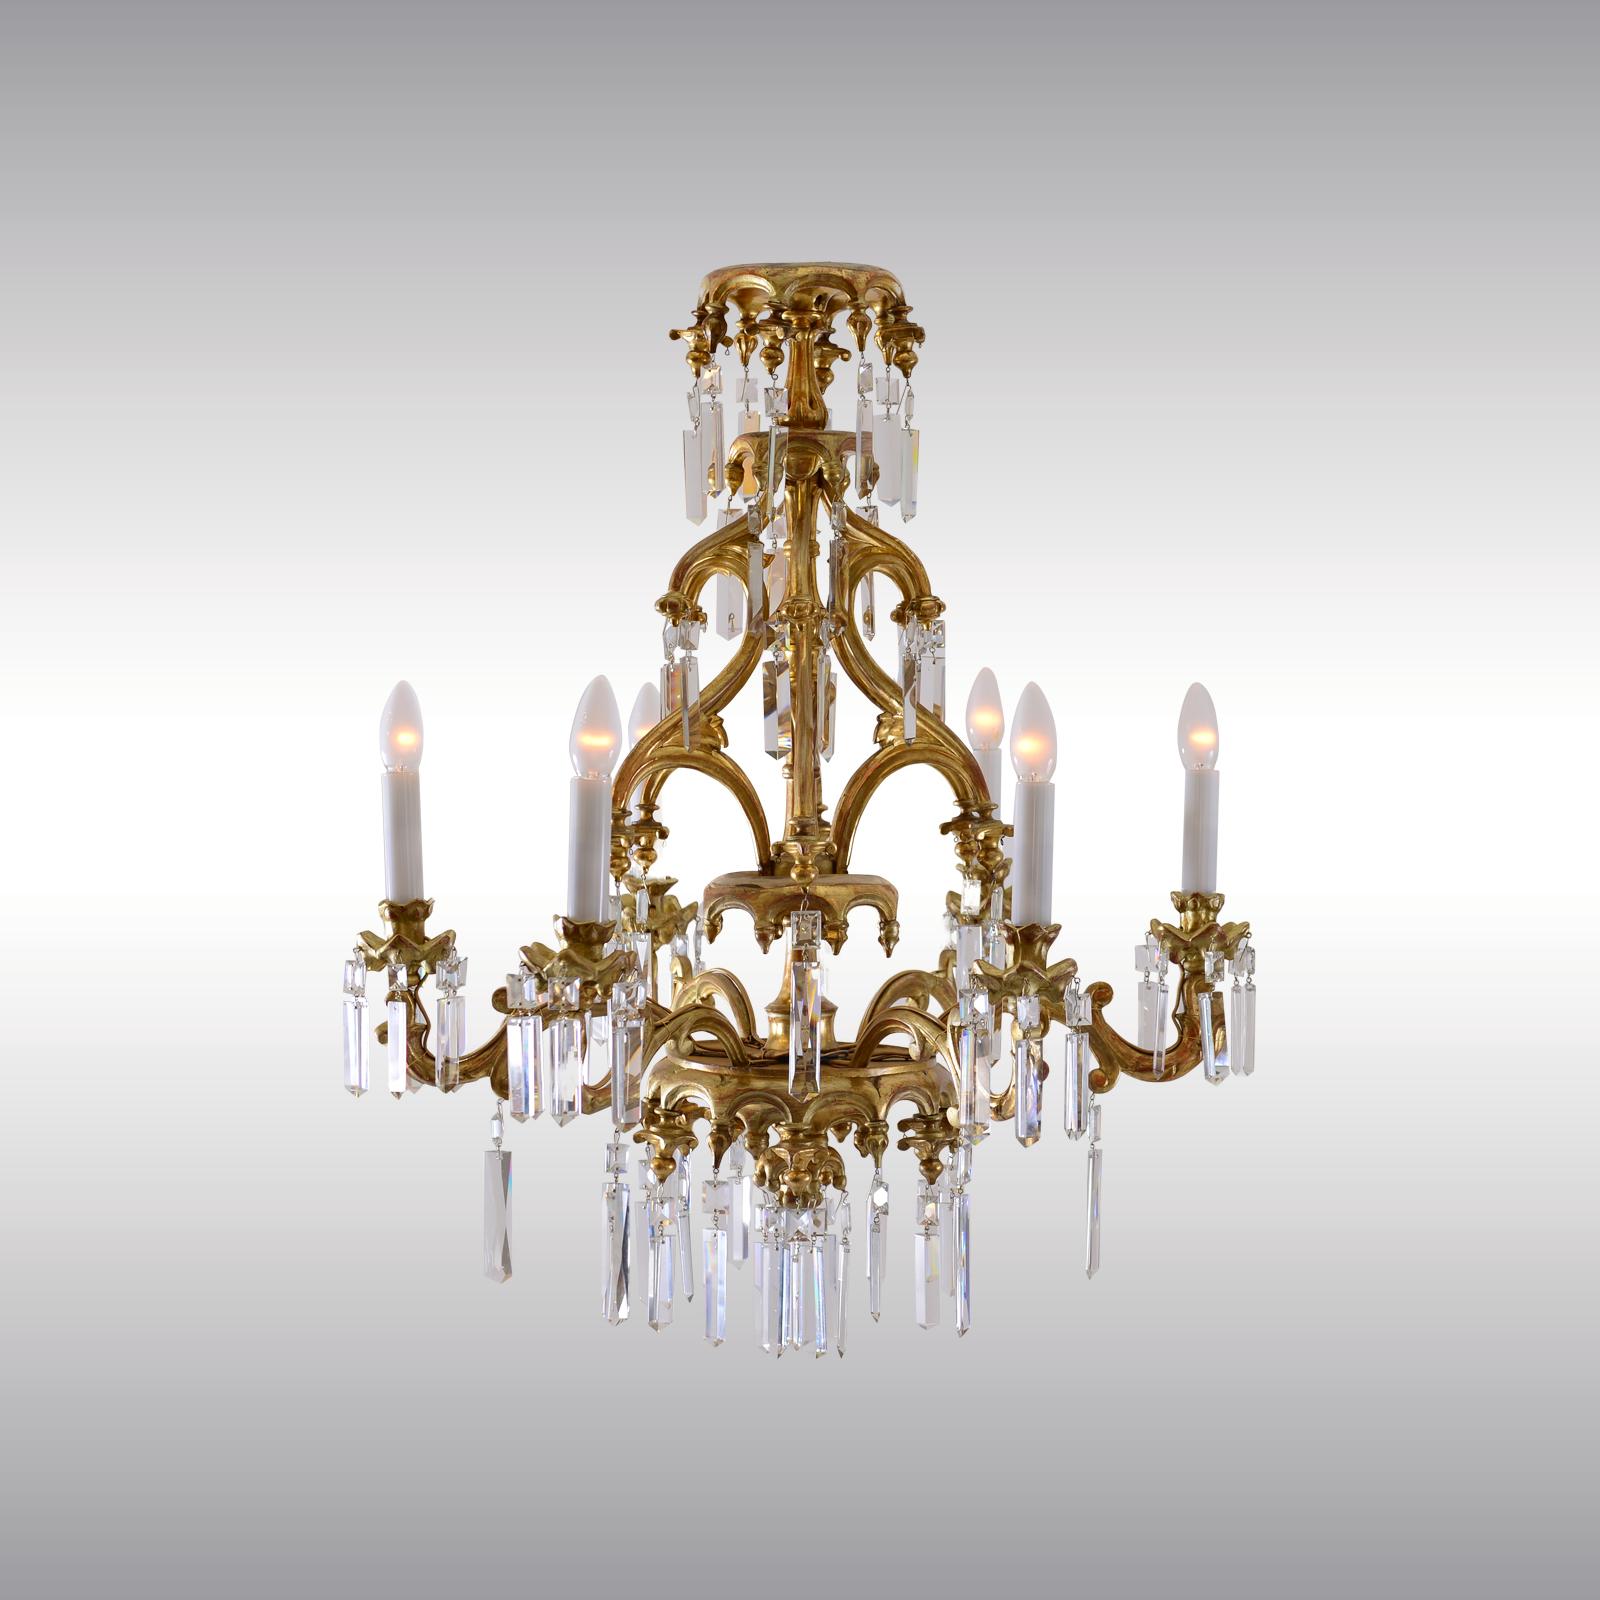 Gothic Revival Original Historistic Limewood Chandelier, Laxenburger Gothic Style, 19th Century For Sale